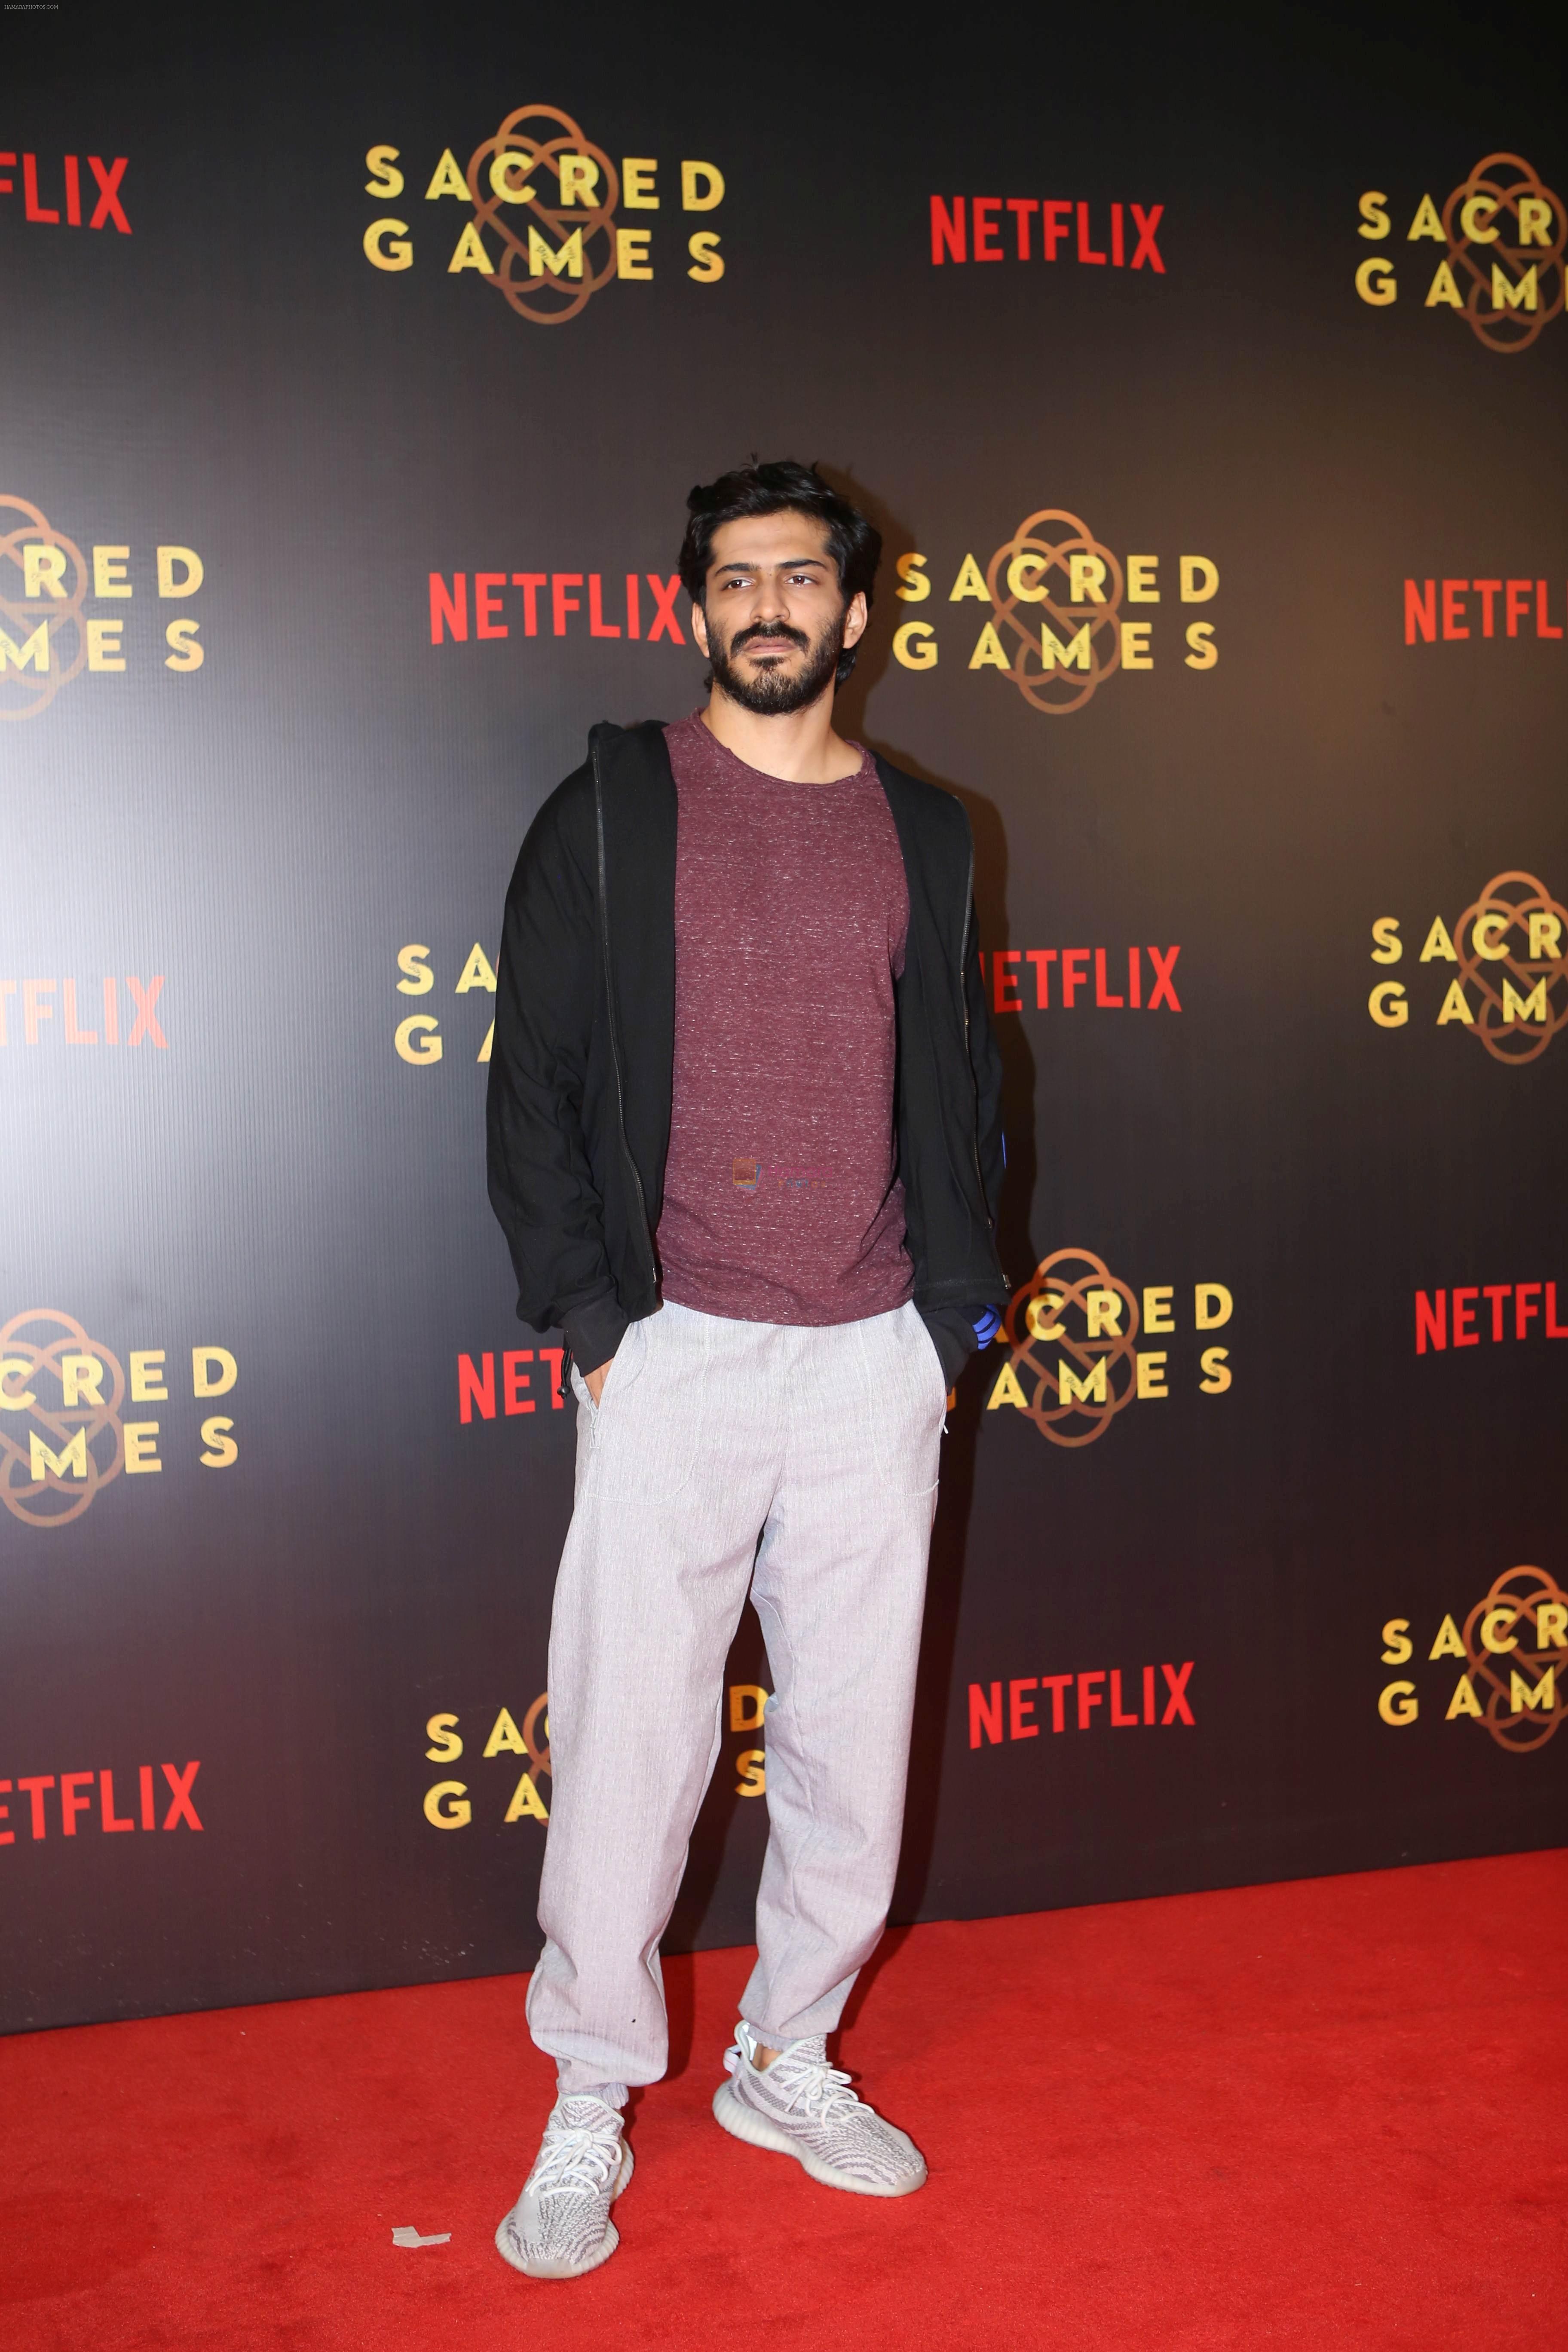 Harshavardhan Kapoor at the Screening of Netflix Sacred Games in pvr icon Andheri on 28th June 2018